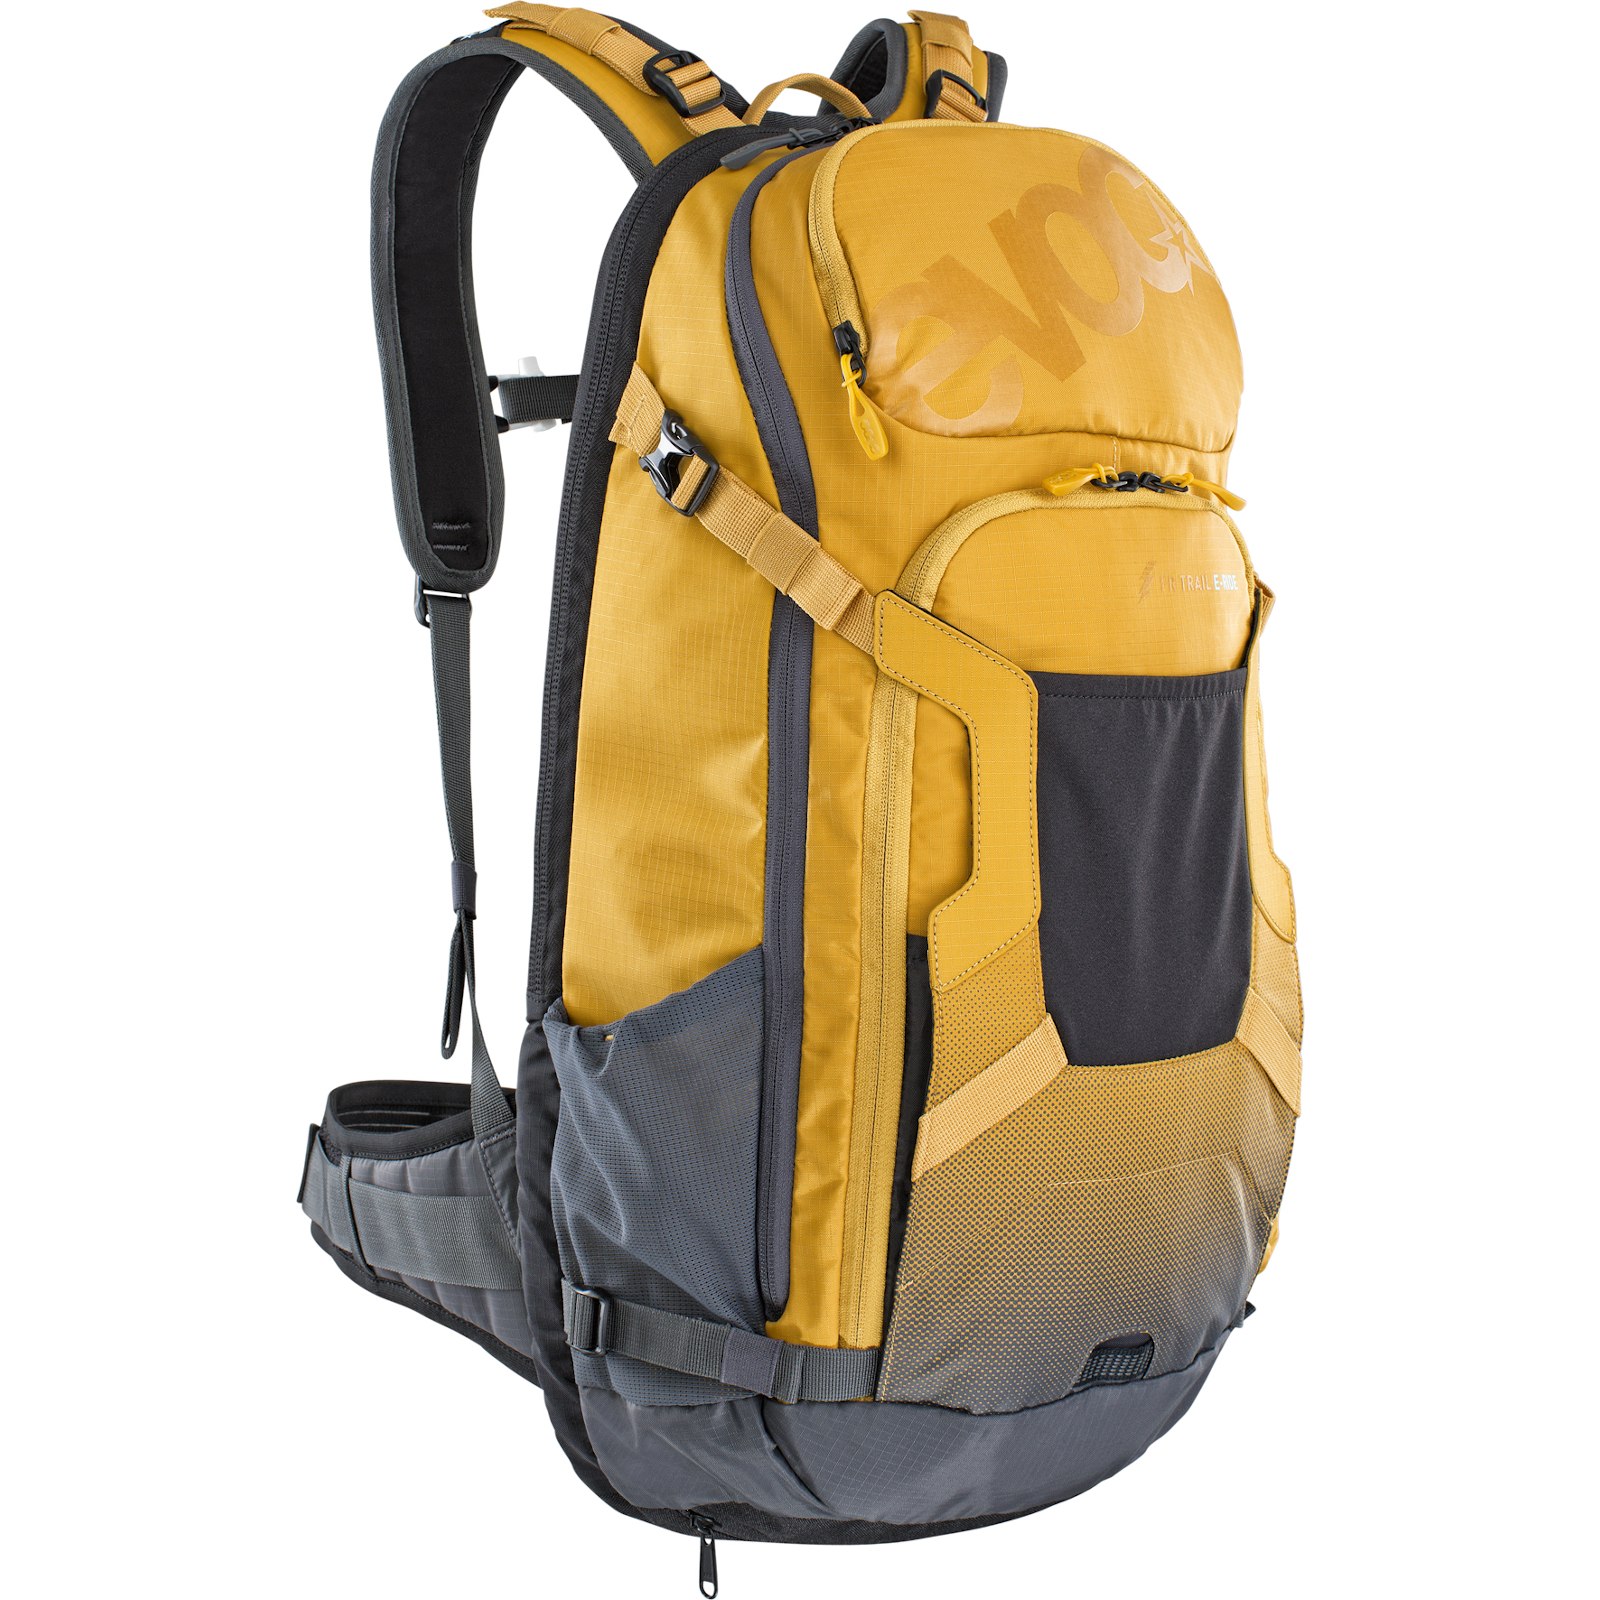 Image of EVOC Fr Trail E-Ride Protector Backpack - 20 L - Loam/Carbon Grey